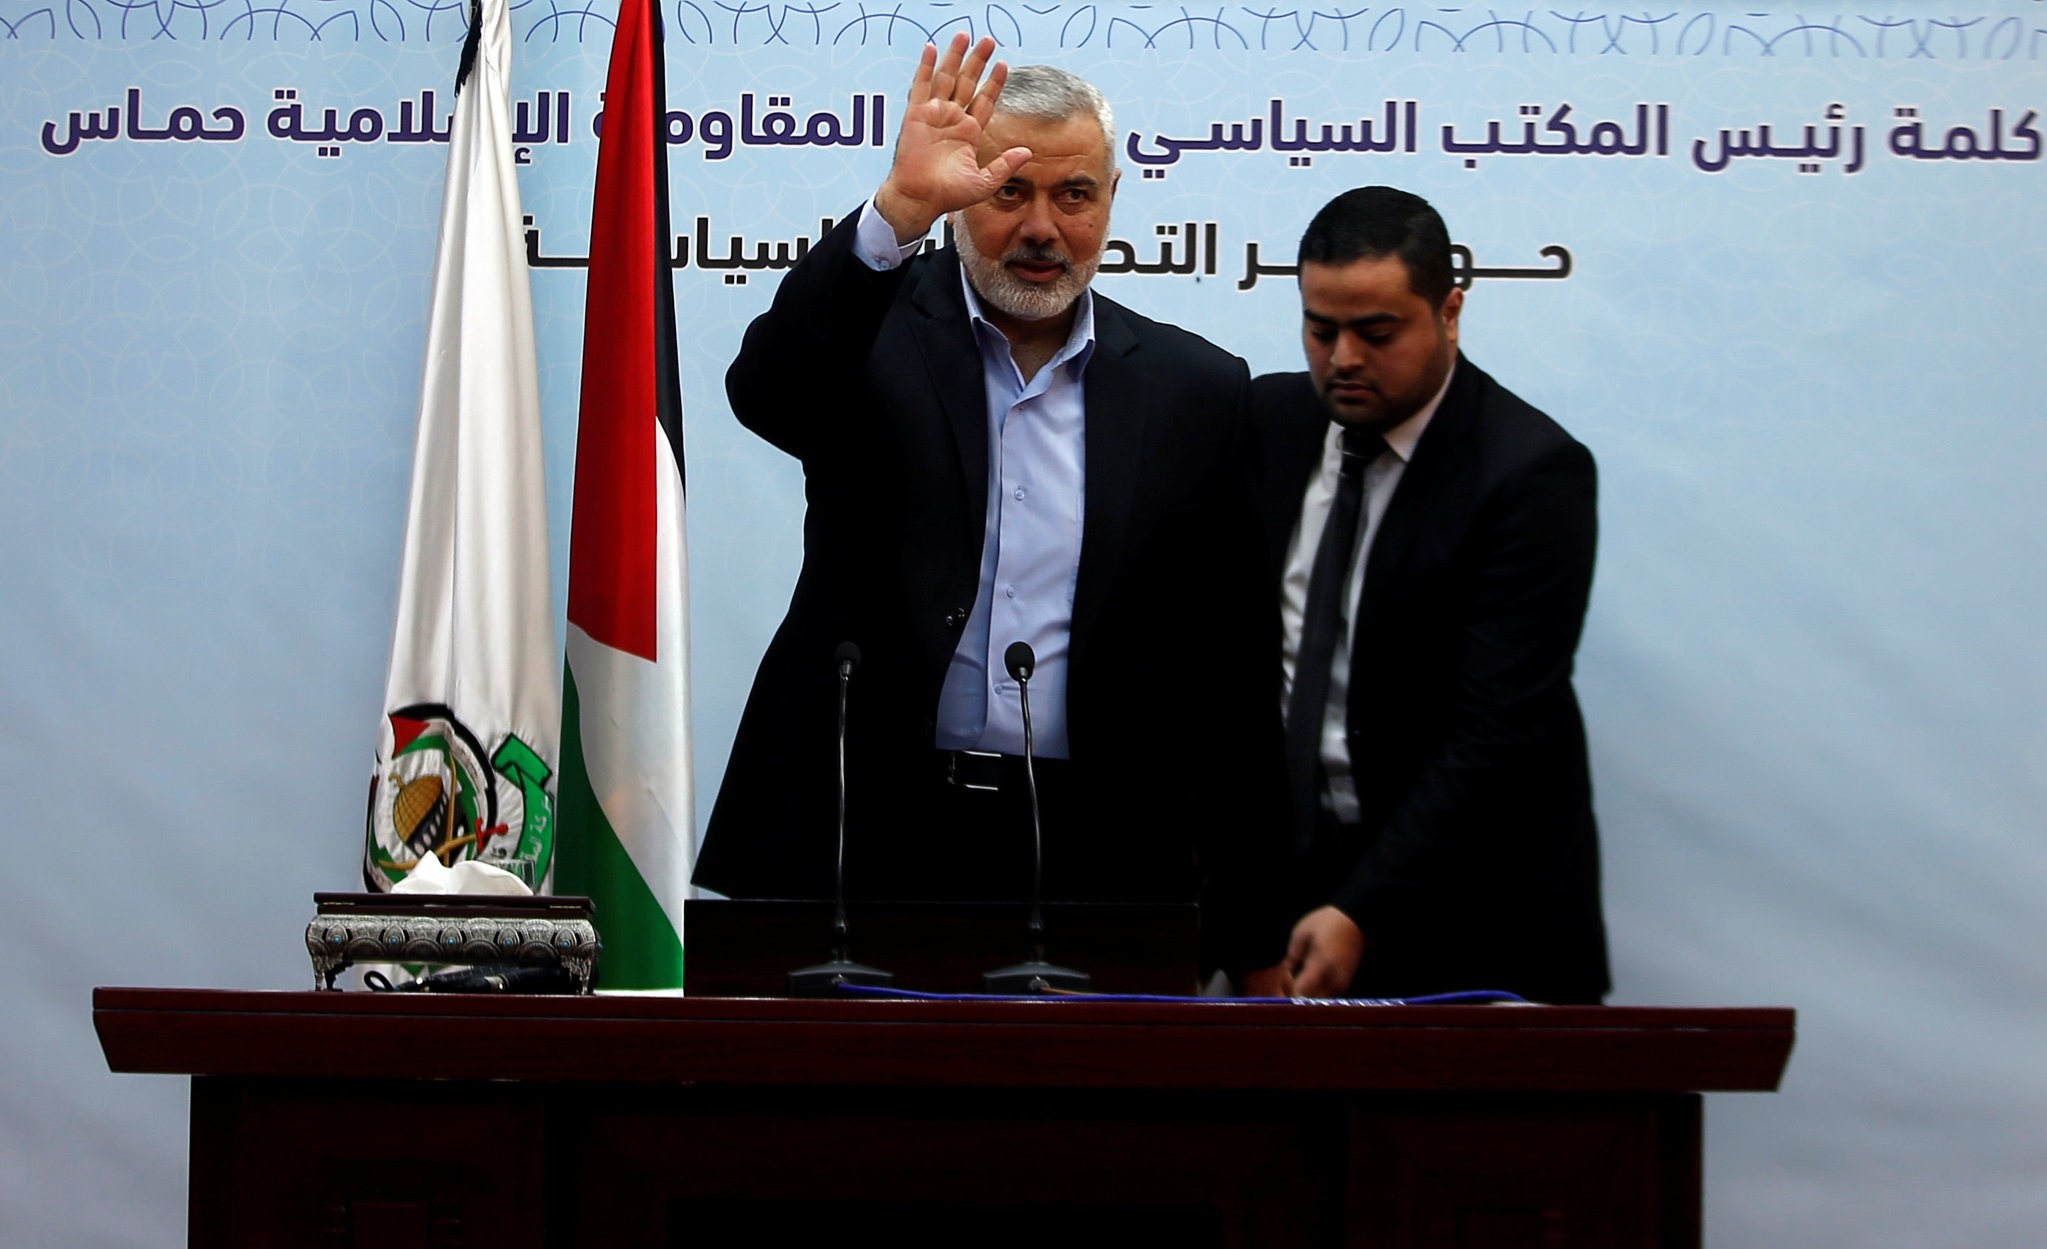 Hamas Chief Ismail Haniyeh waves as he delivers a speech in Gaza City January 23, 2018. (REUTERS Photo)